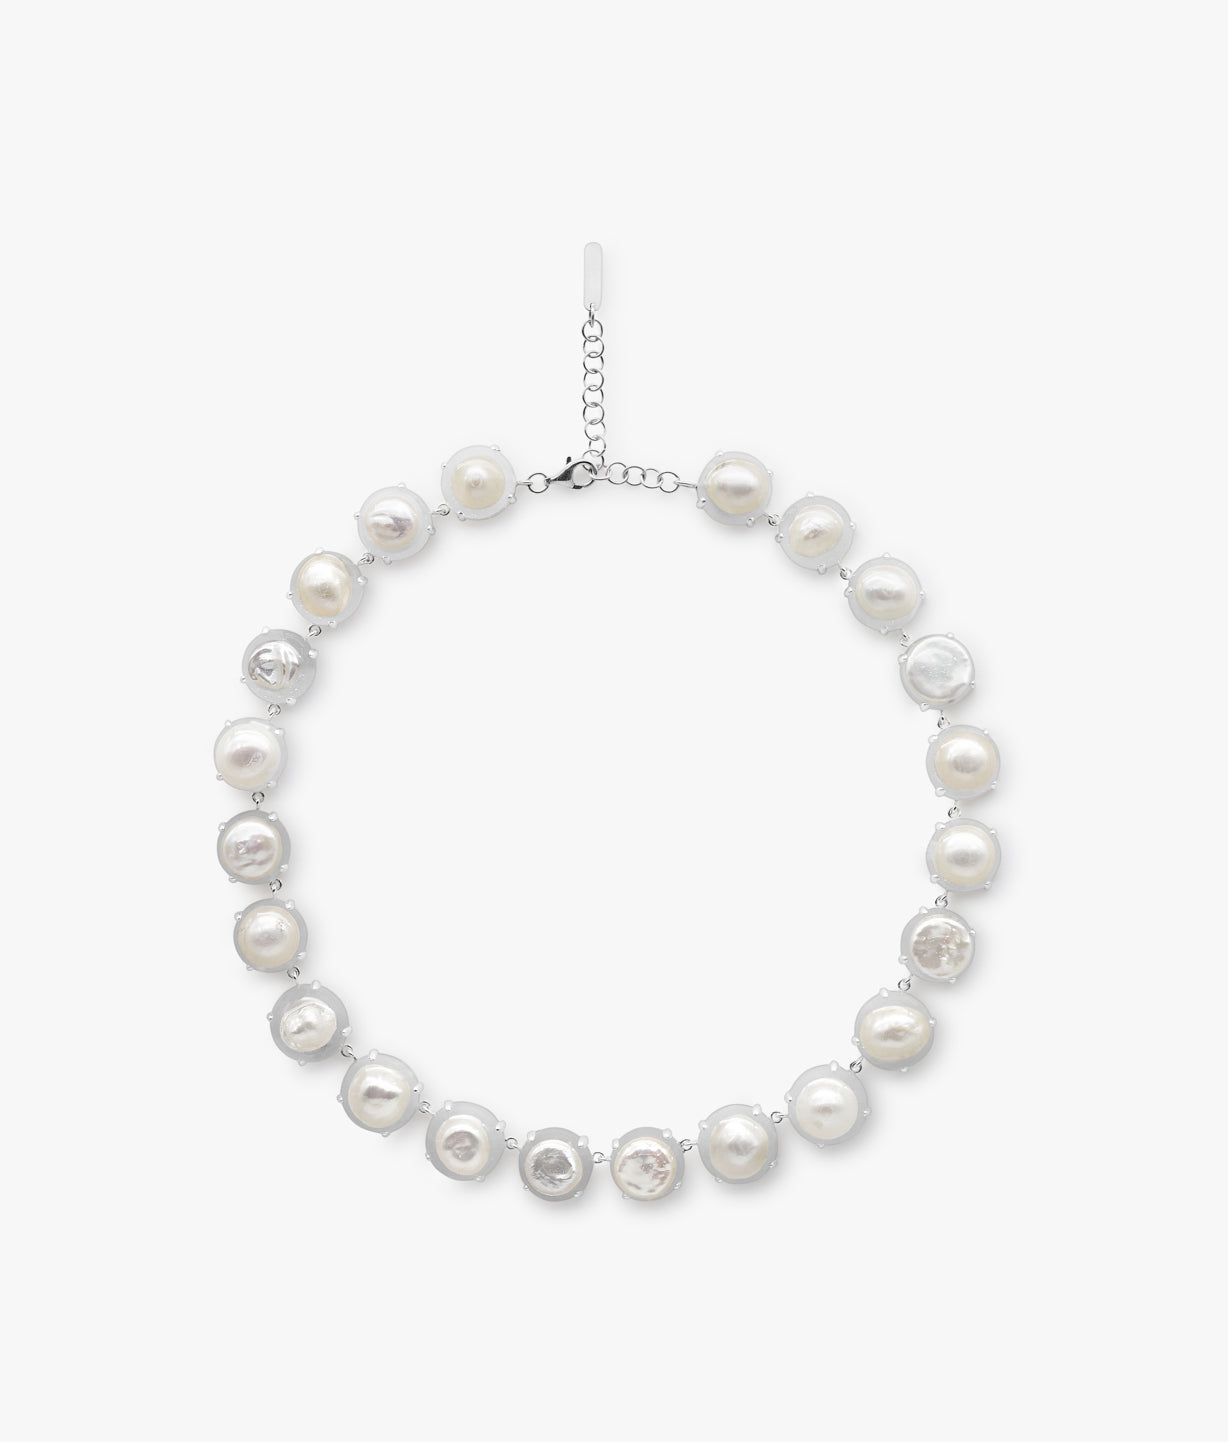 Naked Pearls Encapsulated Necklace